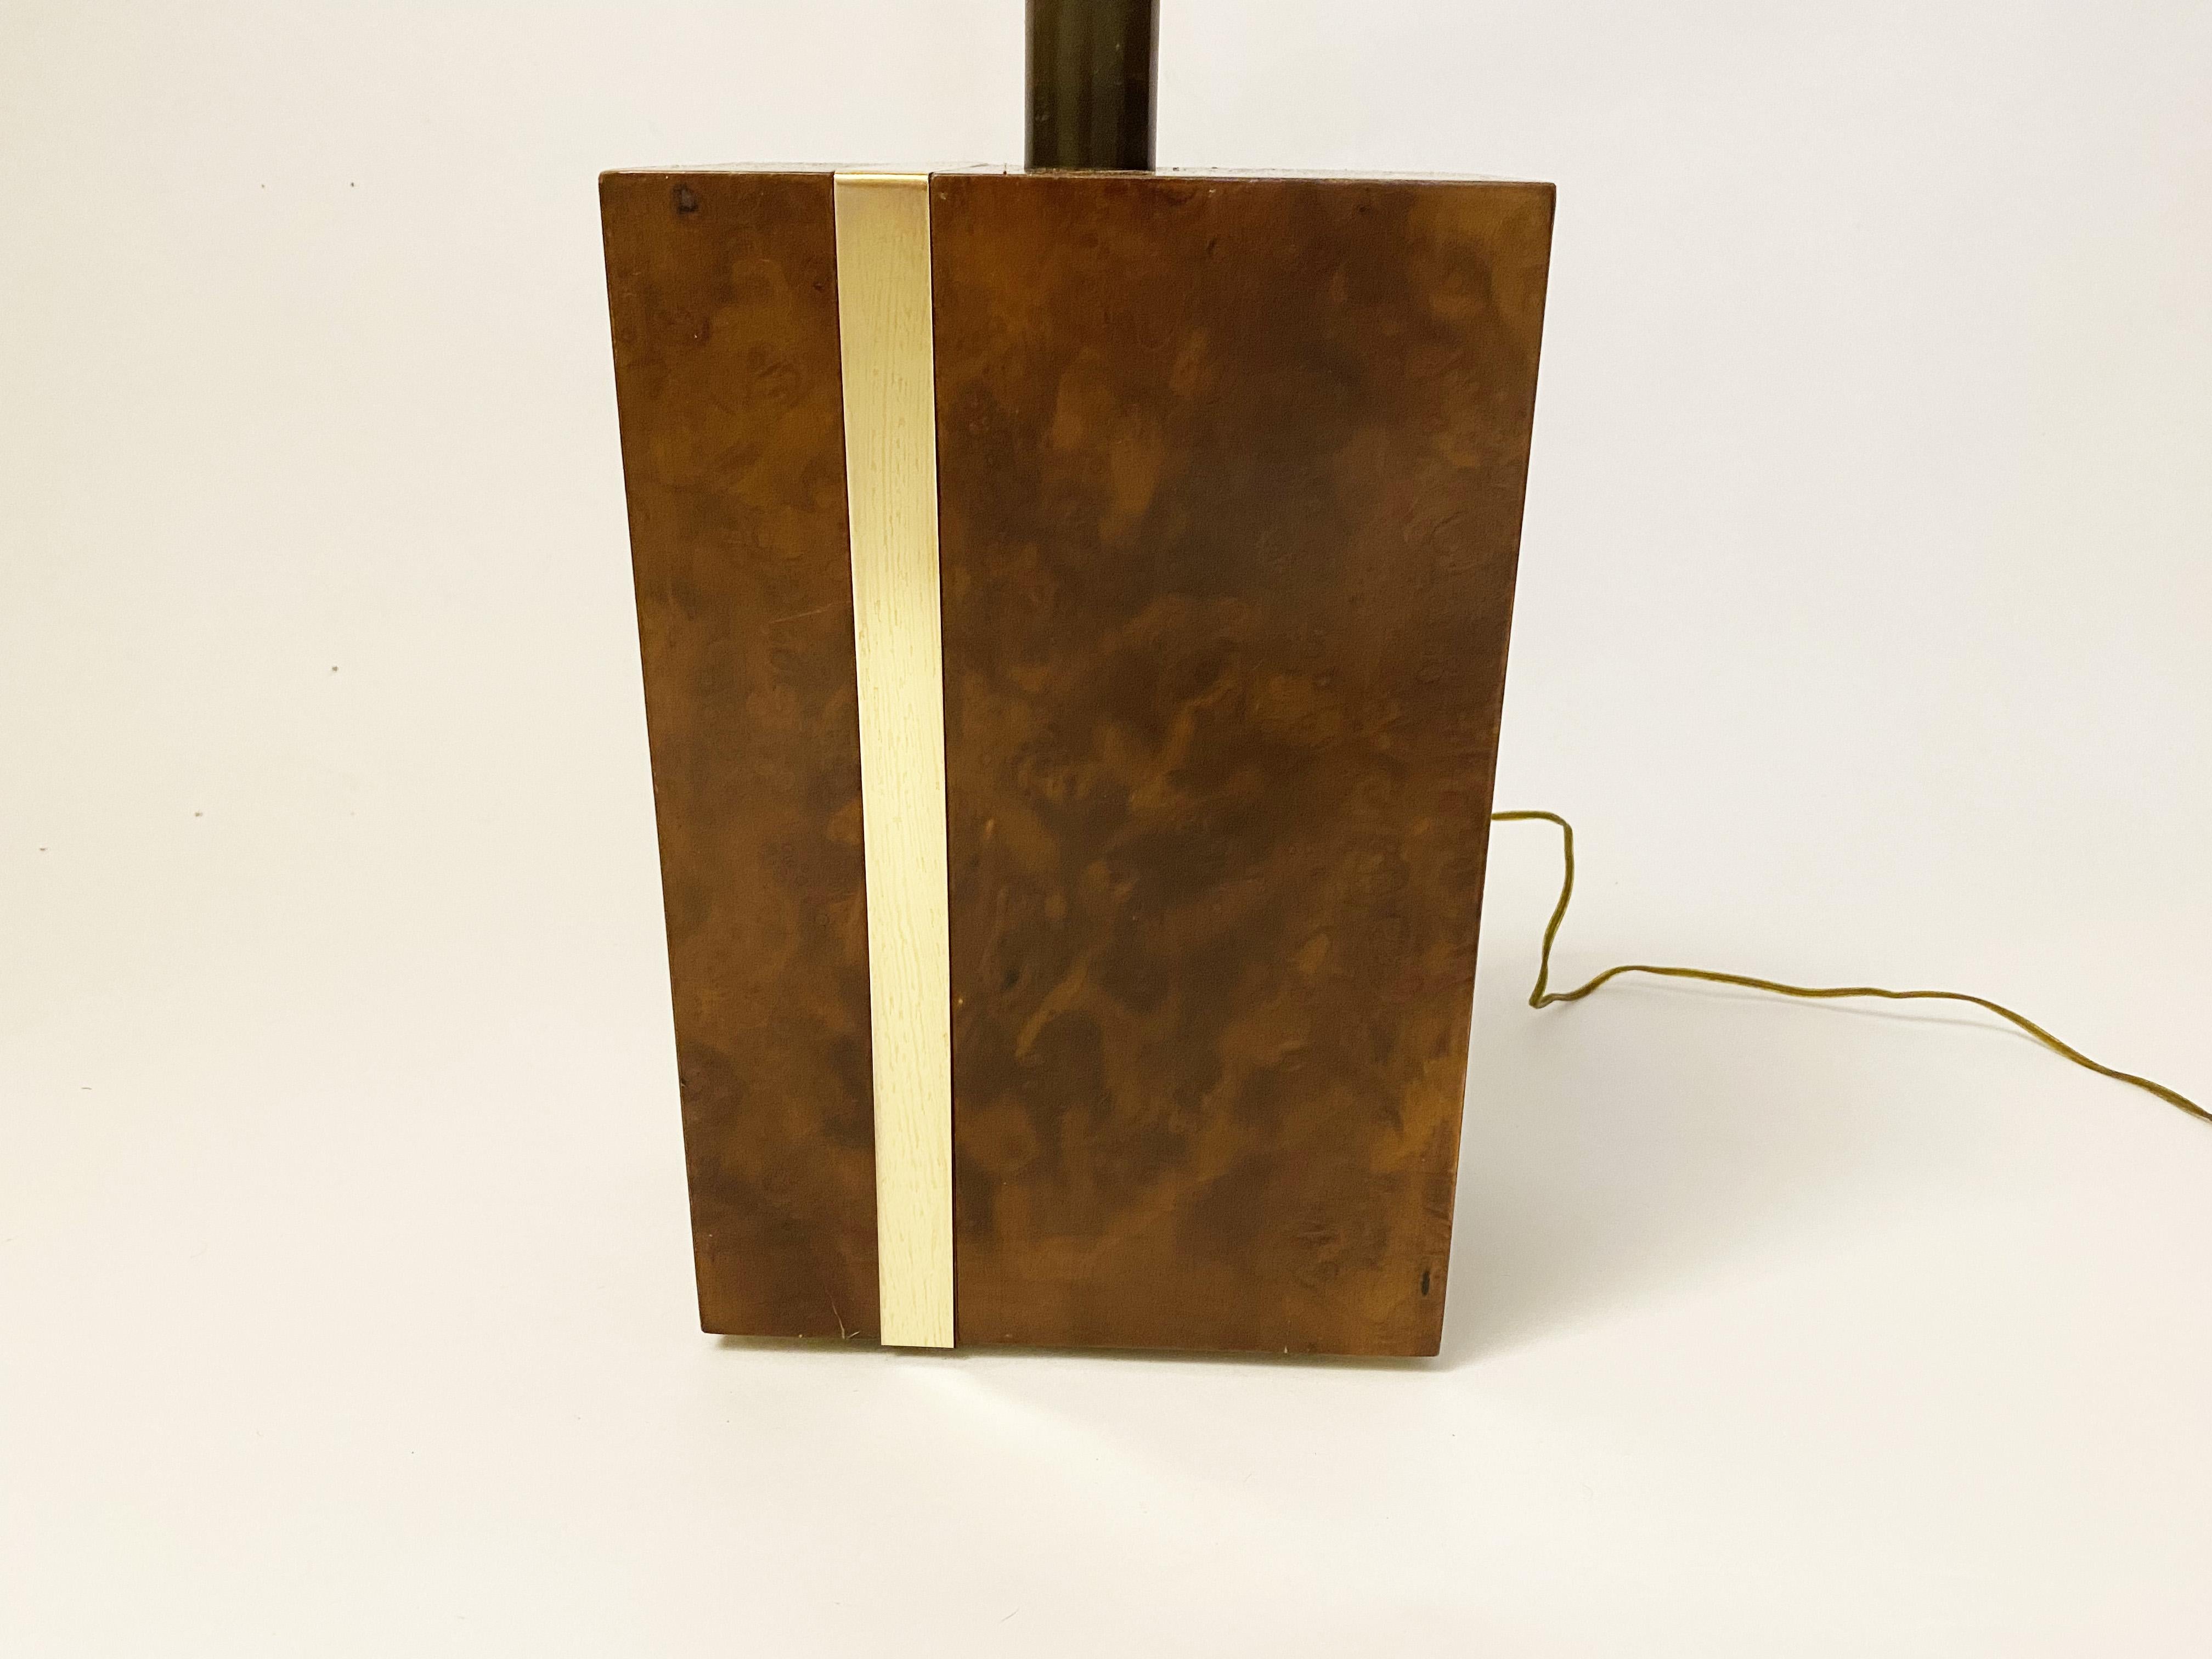 Modernist lamp in Thuya burl wood and brass, in the style of Willy Rizzo, 1970s.

base height: 30cm
total height: 65cm